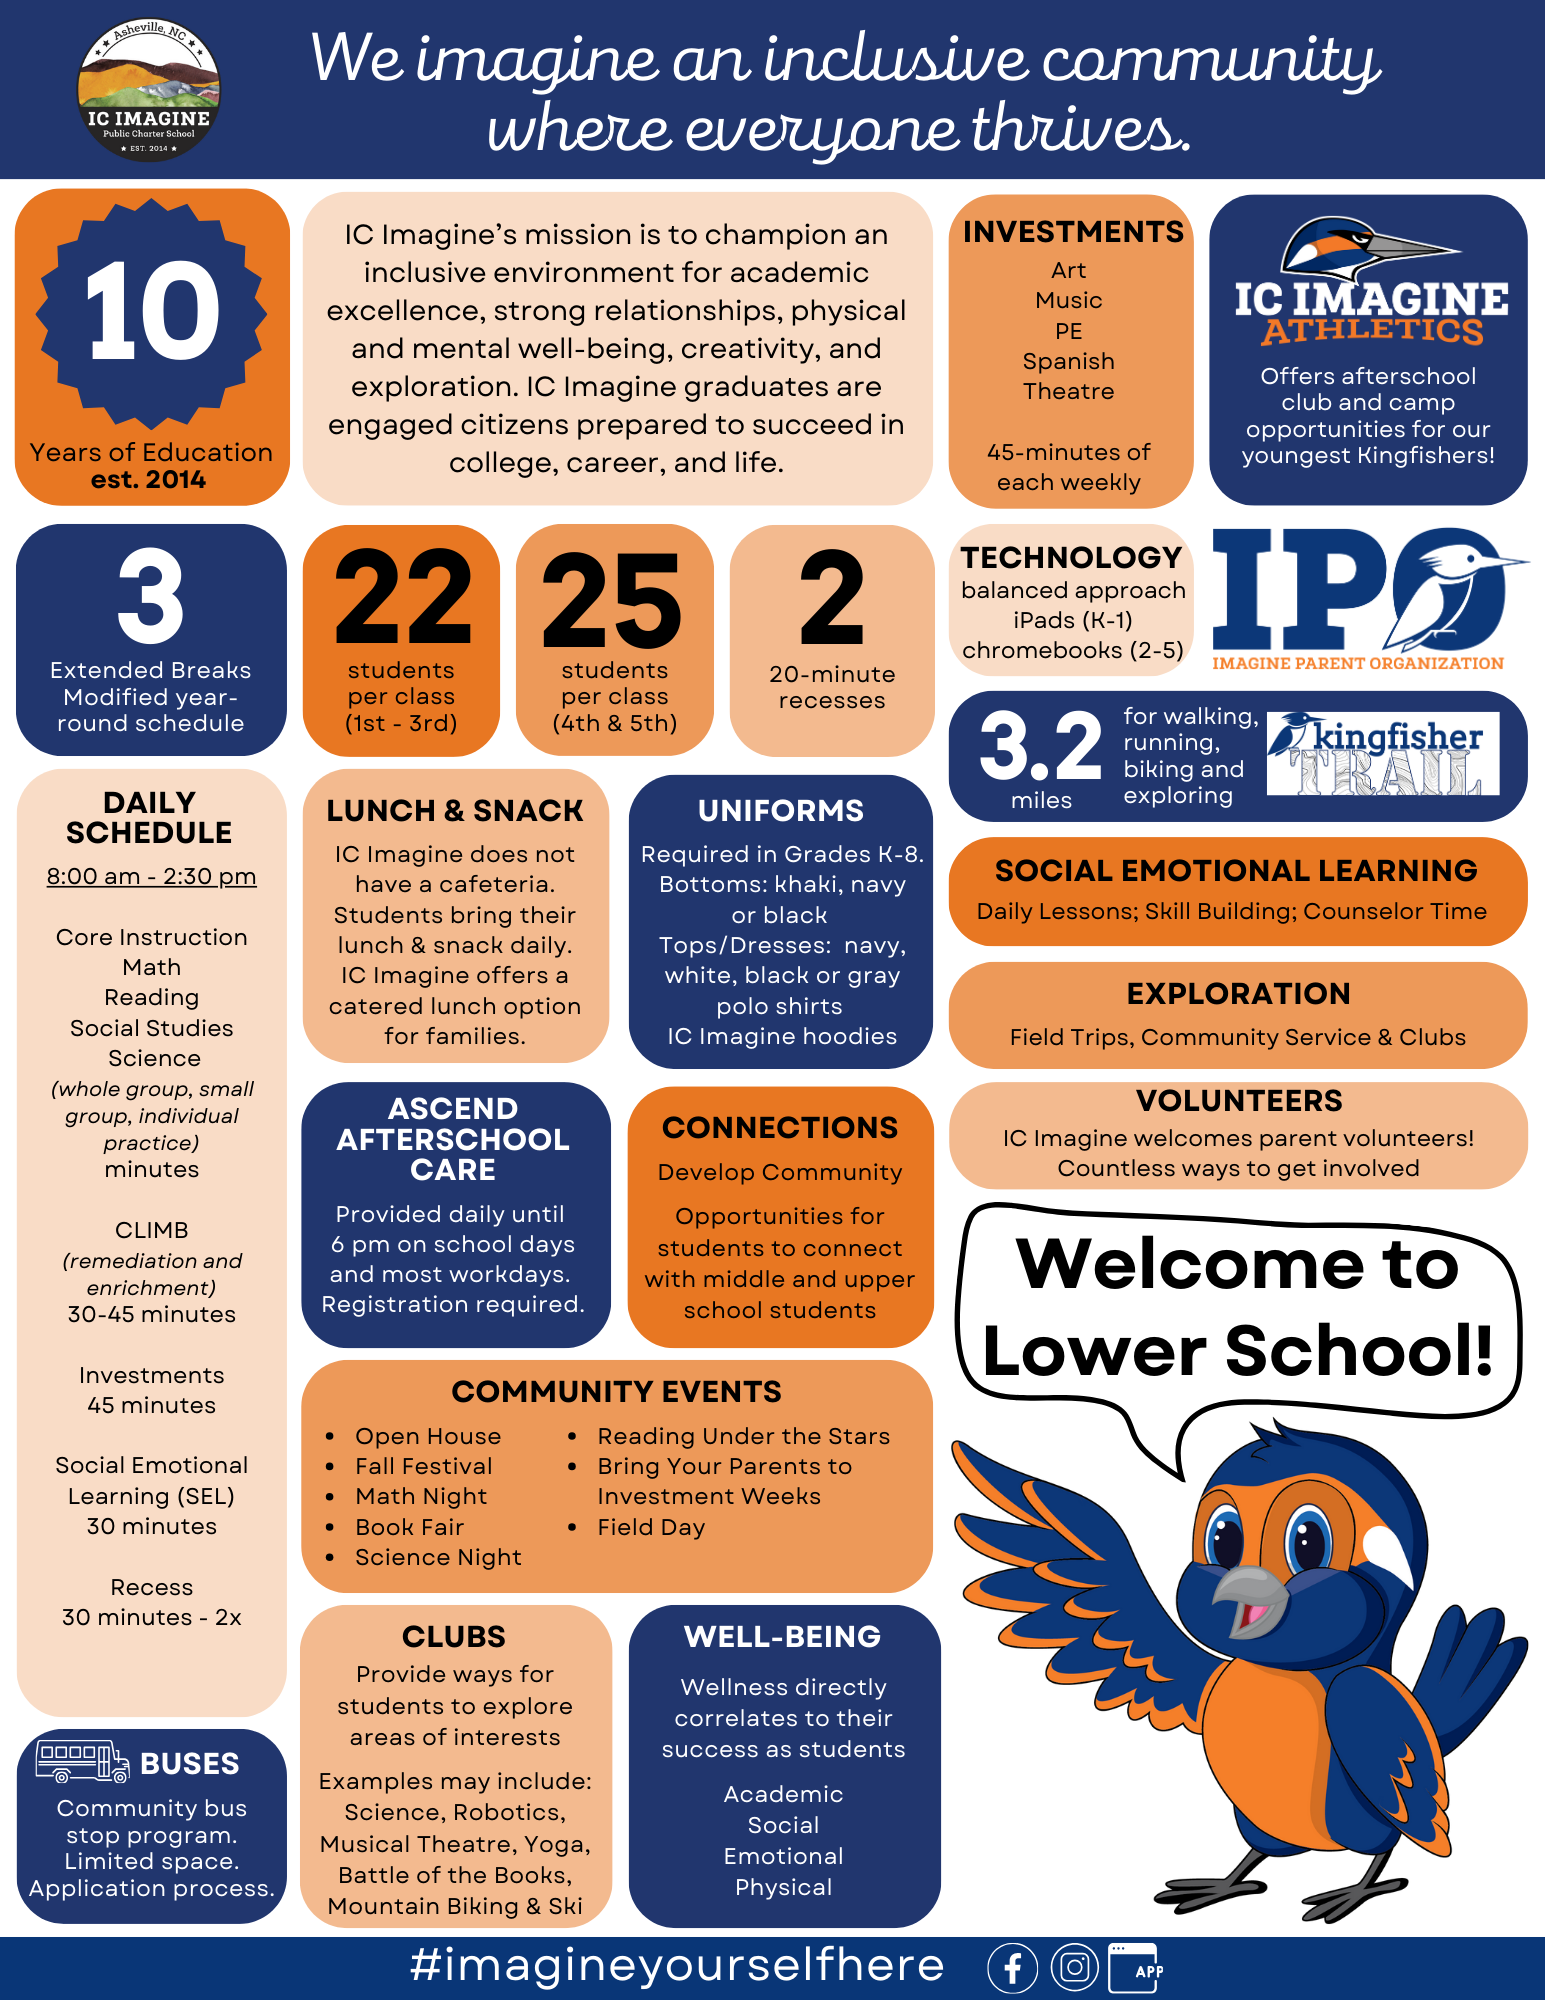 Profile Page with Information about Lower School